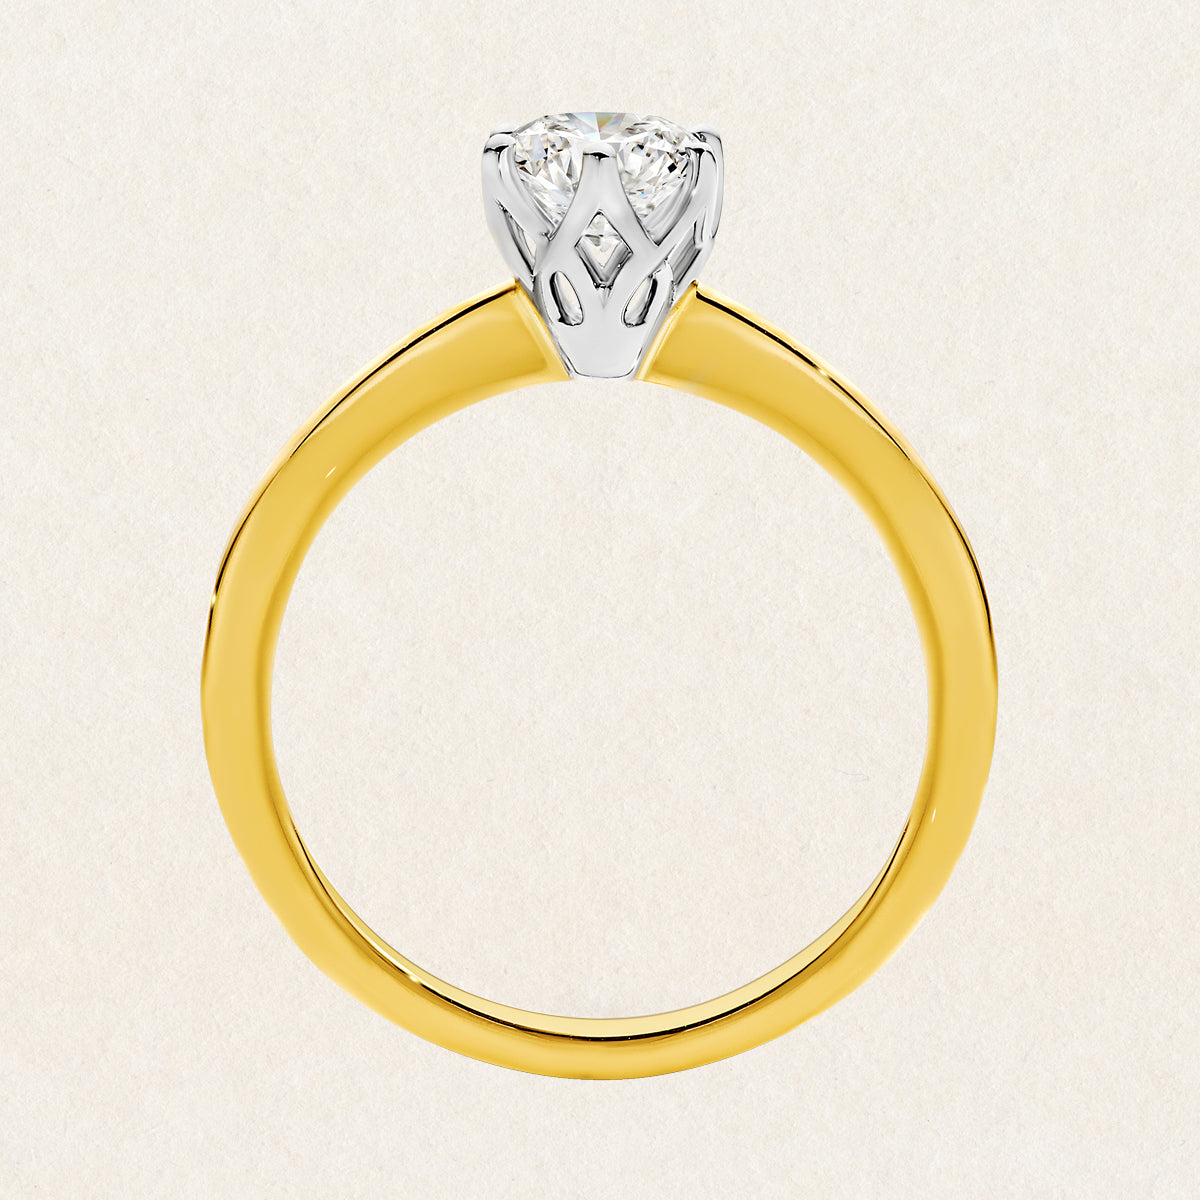 Finishing round cut 0.20ct lab grown diamond solitaire ring made with 18k yellow and white gold